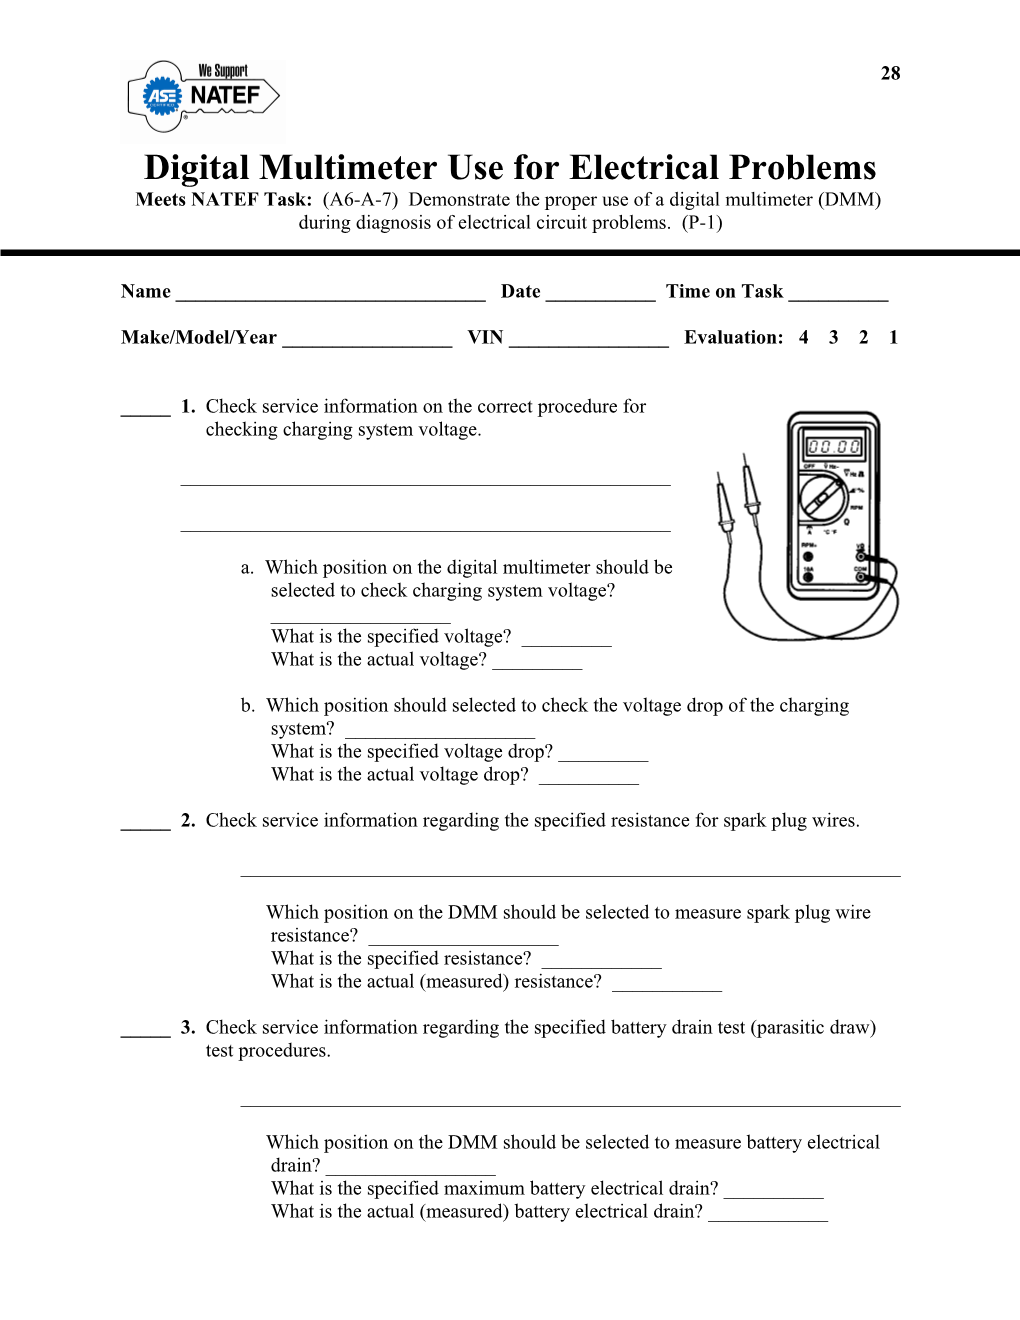 Digital Multimeter Use for Electrical Problems